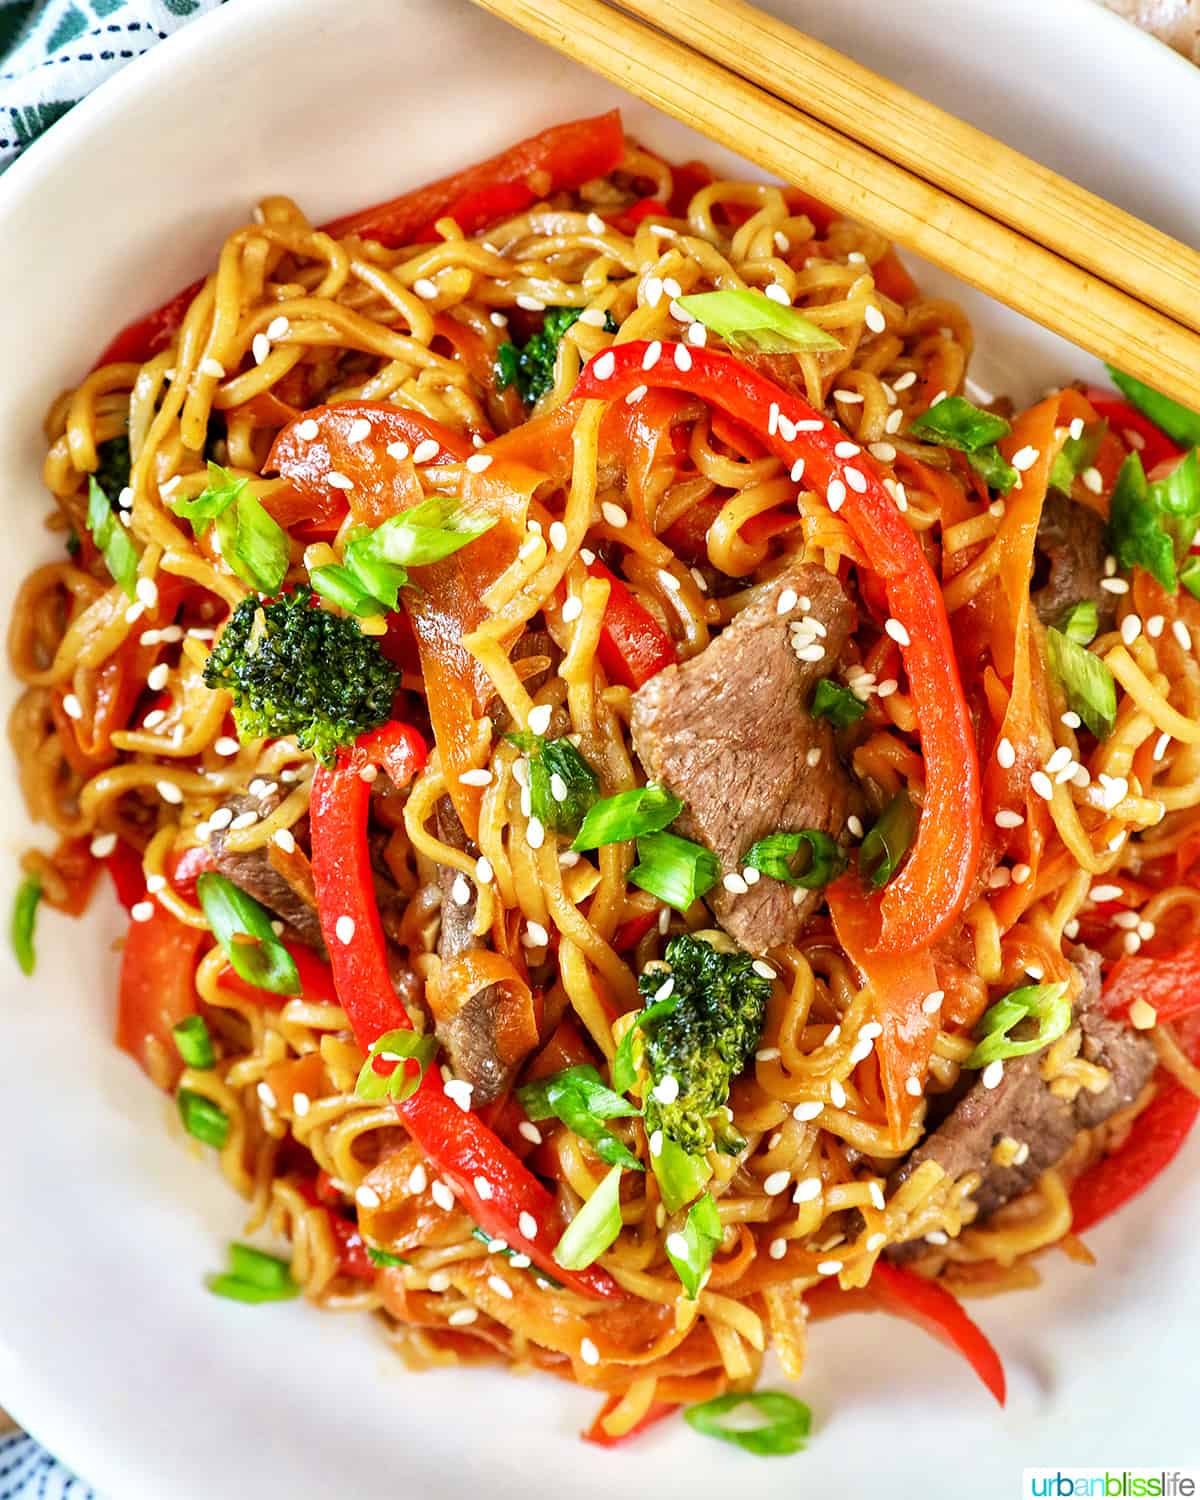 Sesame Garlic Noodles with Steak, broccoli, red peppers, carrots, in a white bowl with chopsticks.